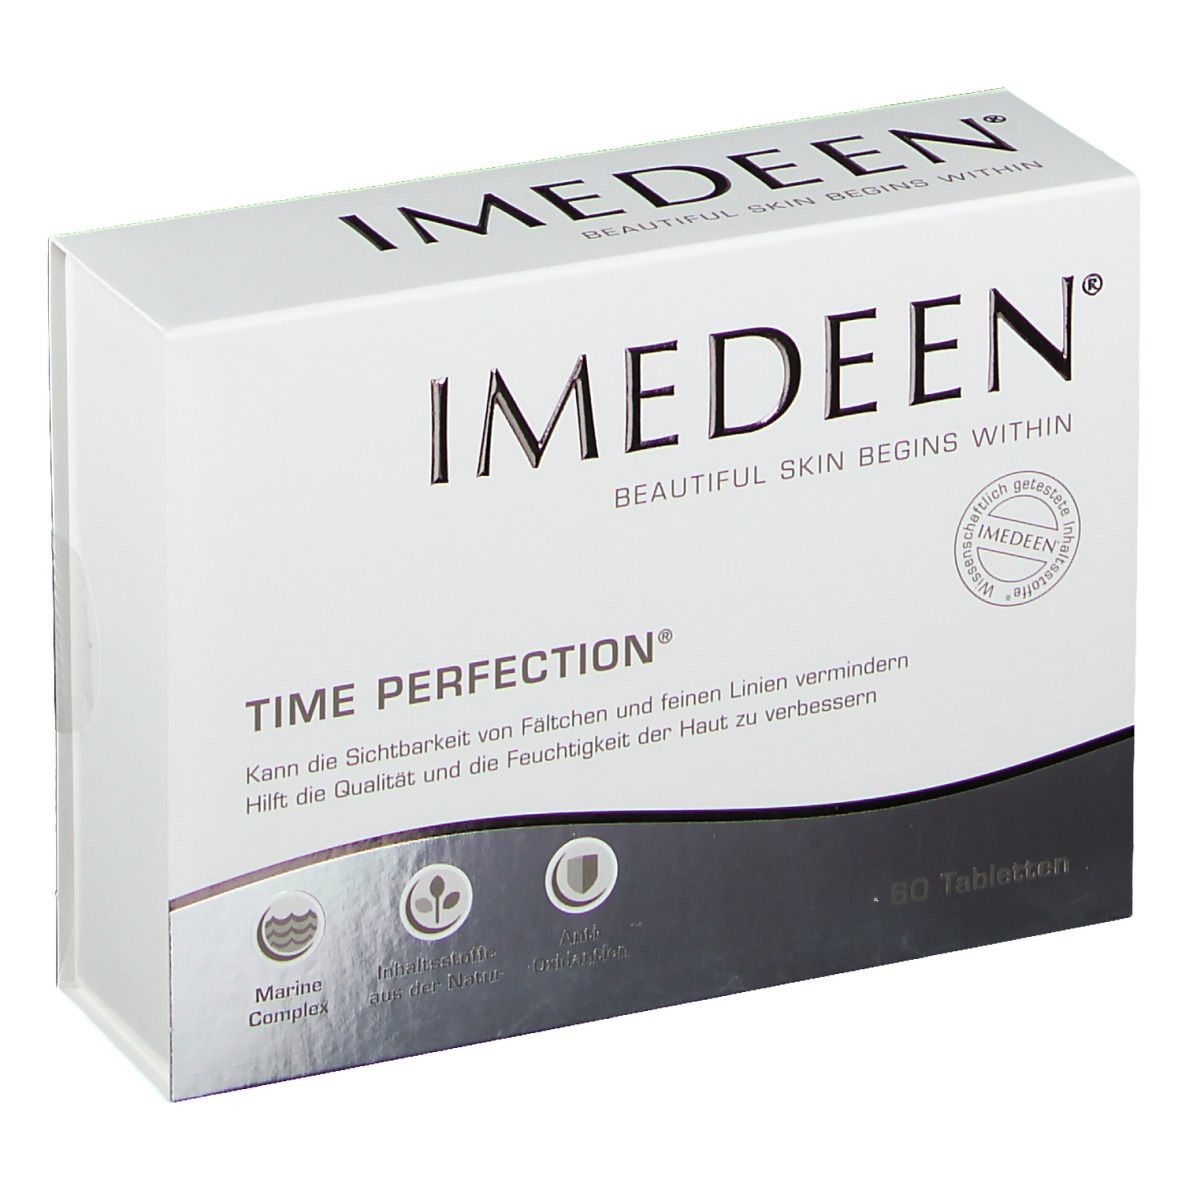 IMEDEEN® time perfection